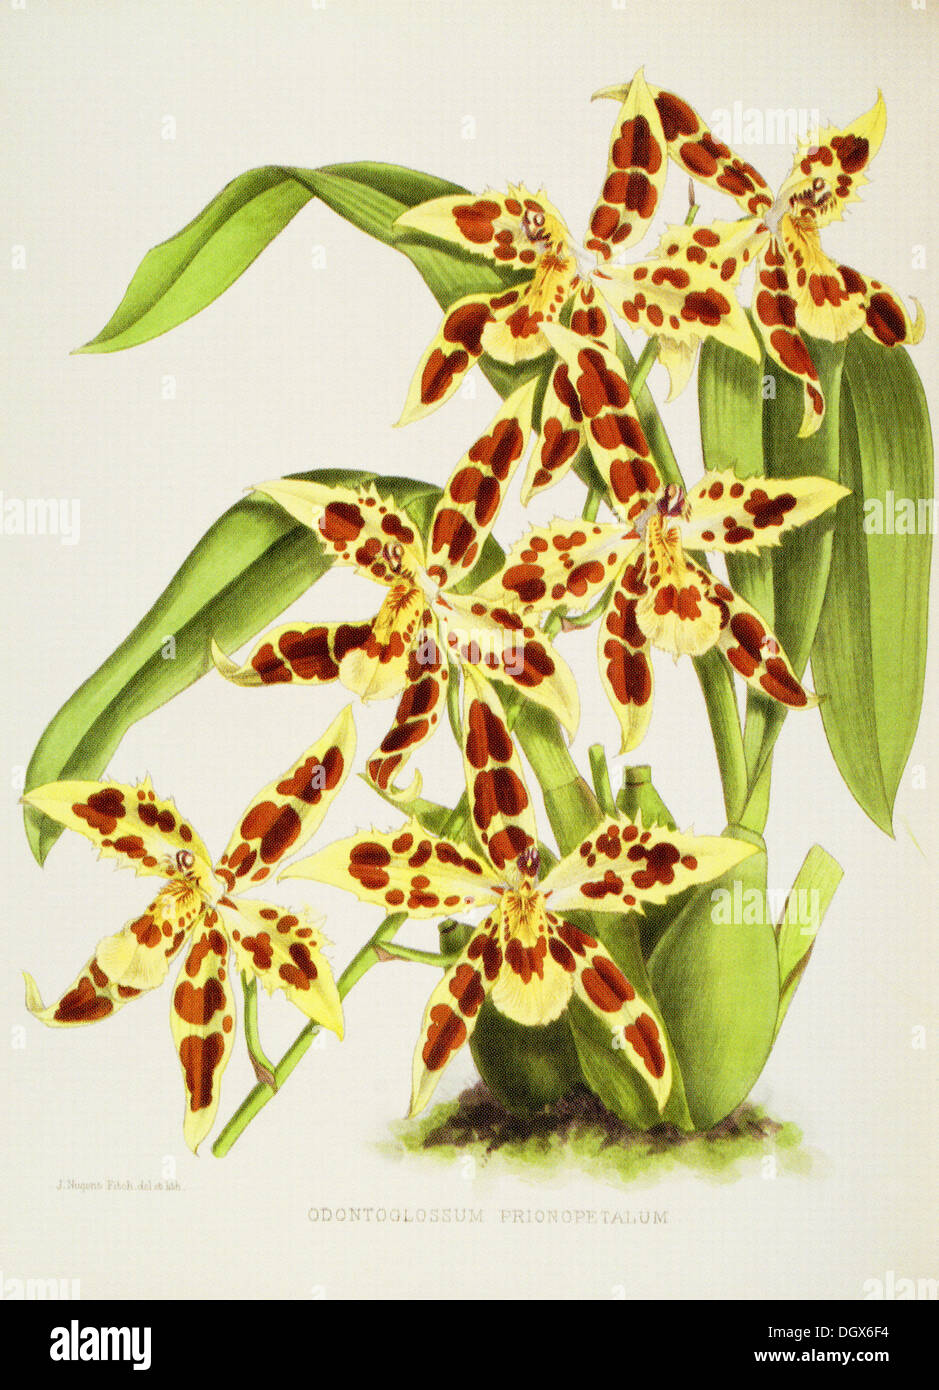 Orchids, Odontoglossum prionopetalum - by John N. Fitch, 1893 Stock Photo